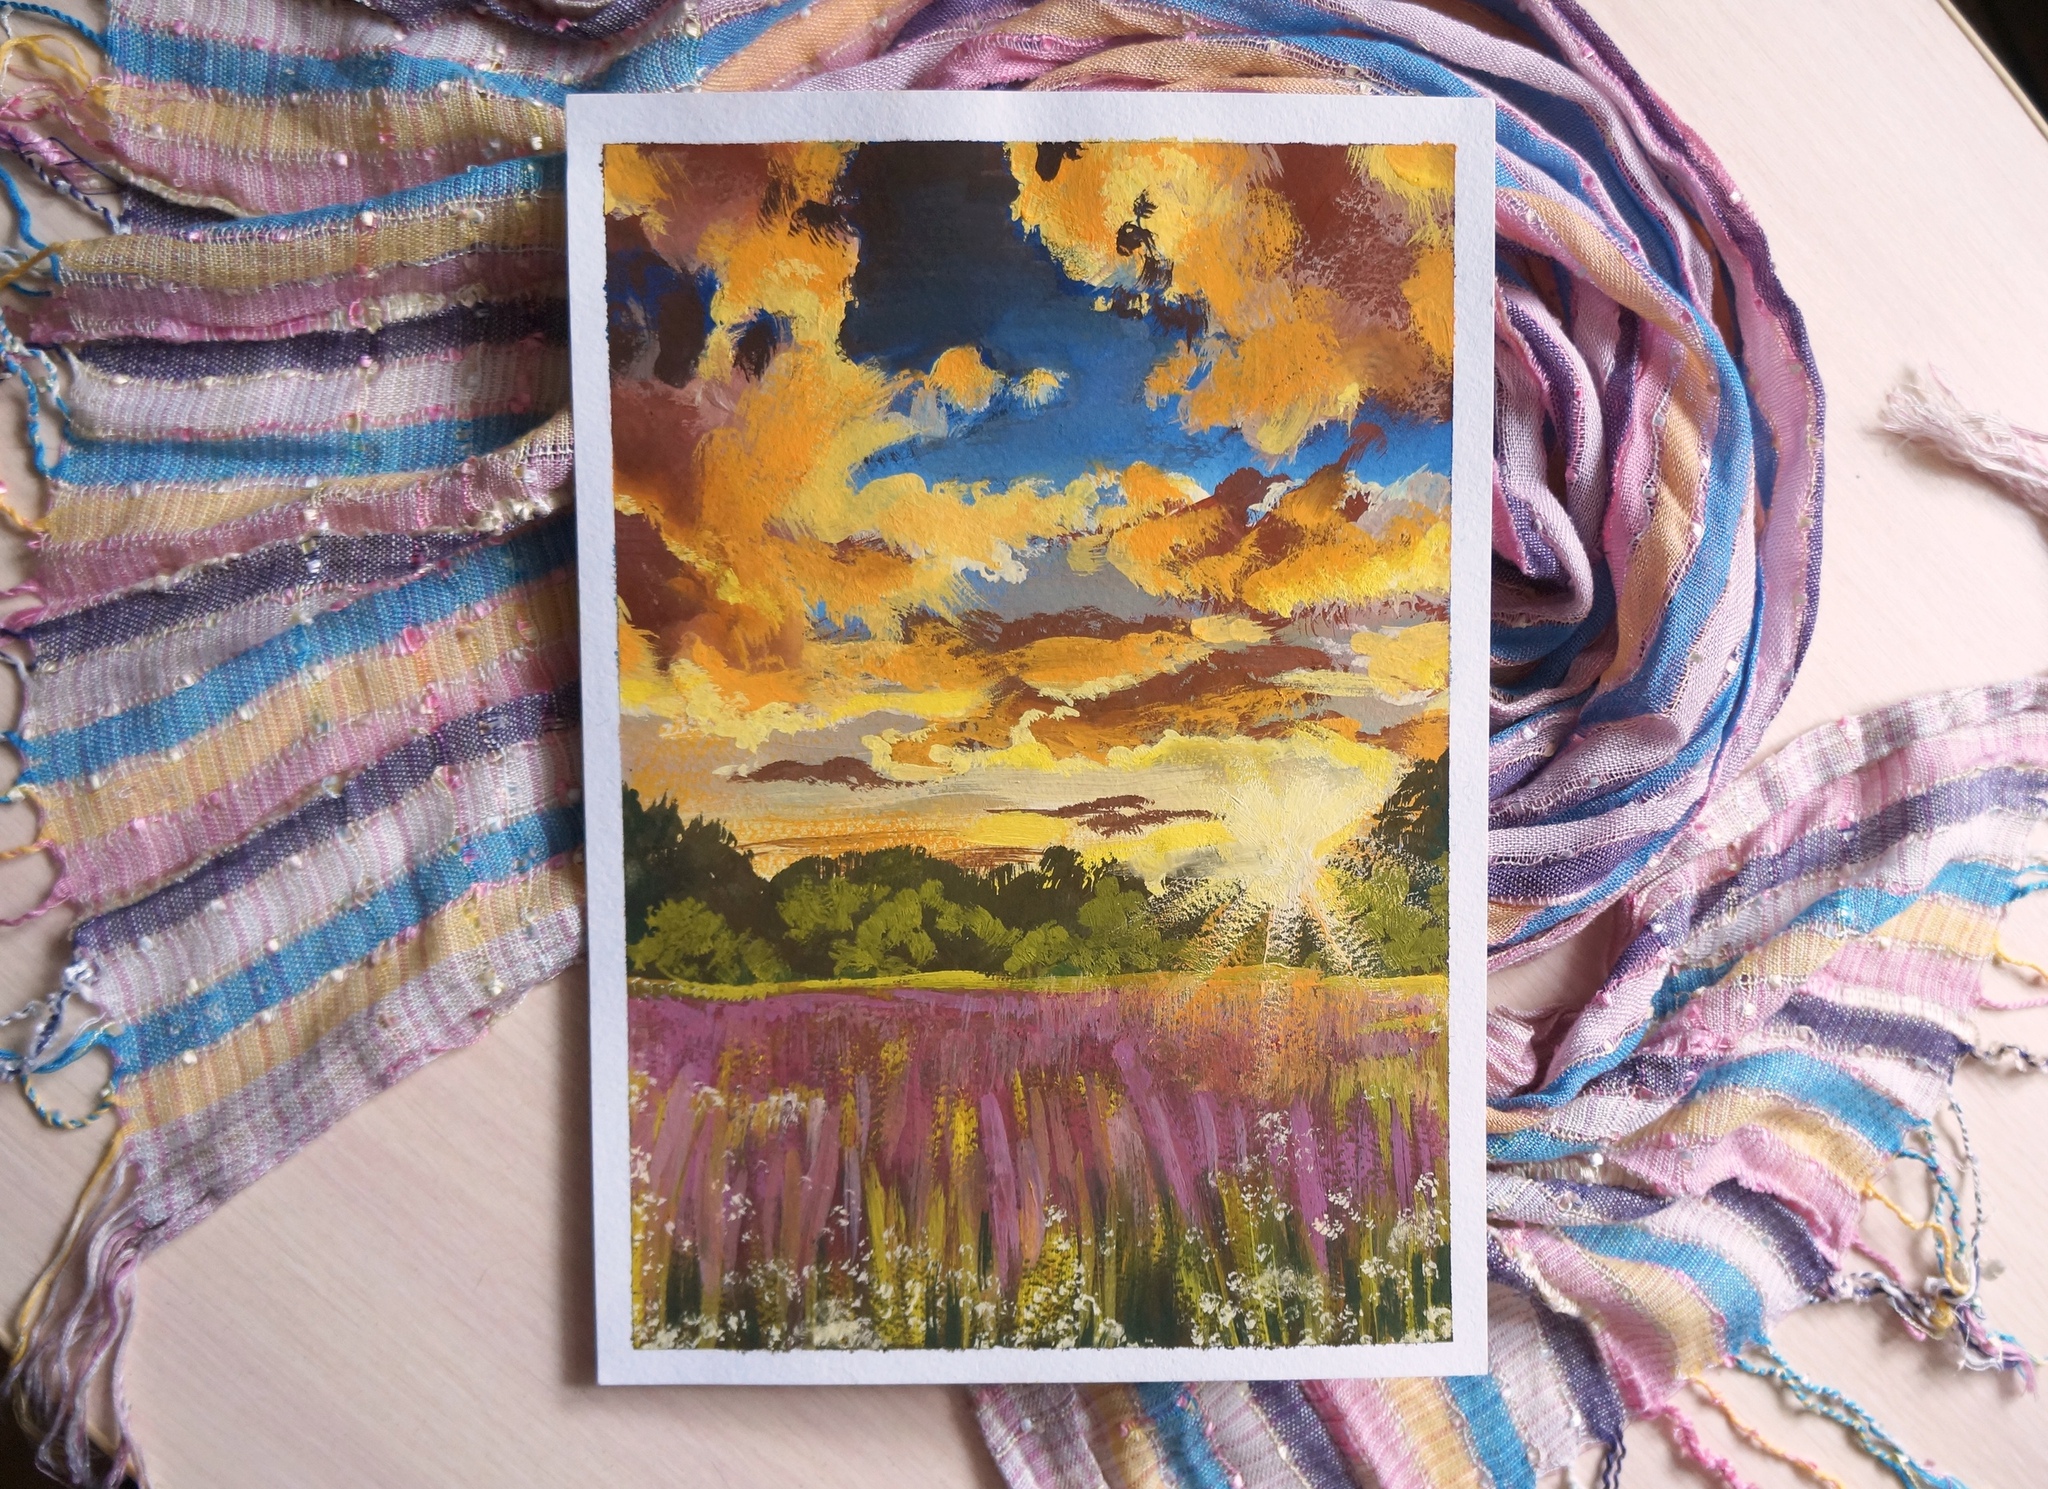 Happy first day of summer! - My, Creation, Nature, Painting, Landscape, Gouache, Flowers, Field, Painting, Sunset, Sunrise, Sky, Clouds, Video, Youtube, Longpost